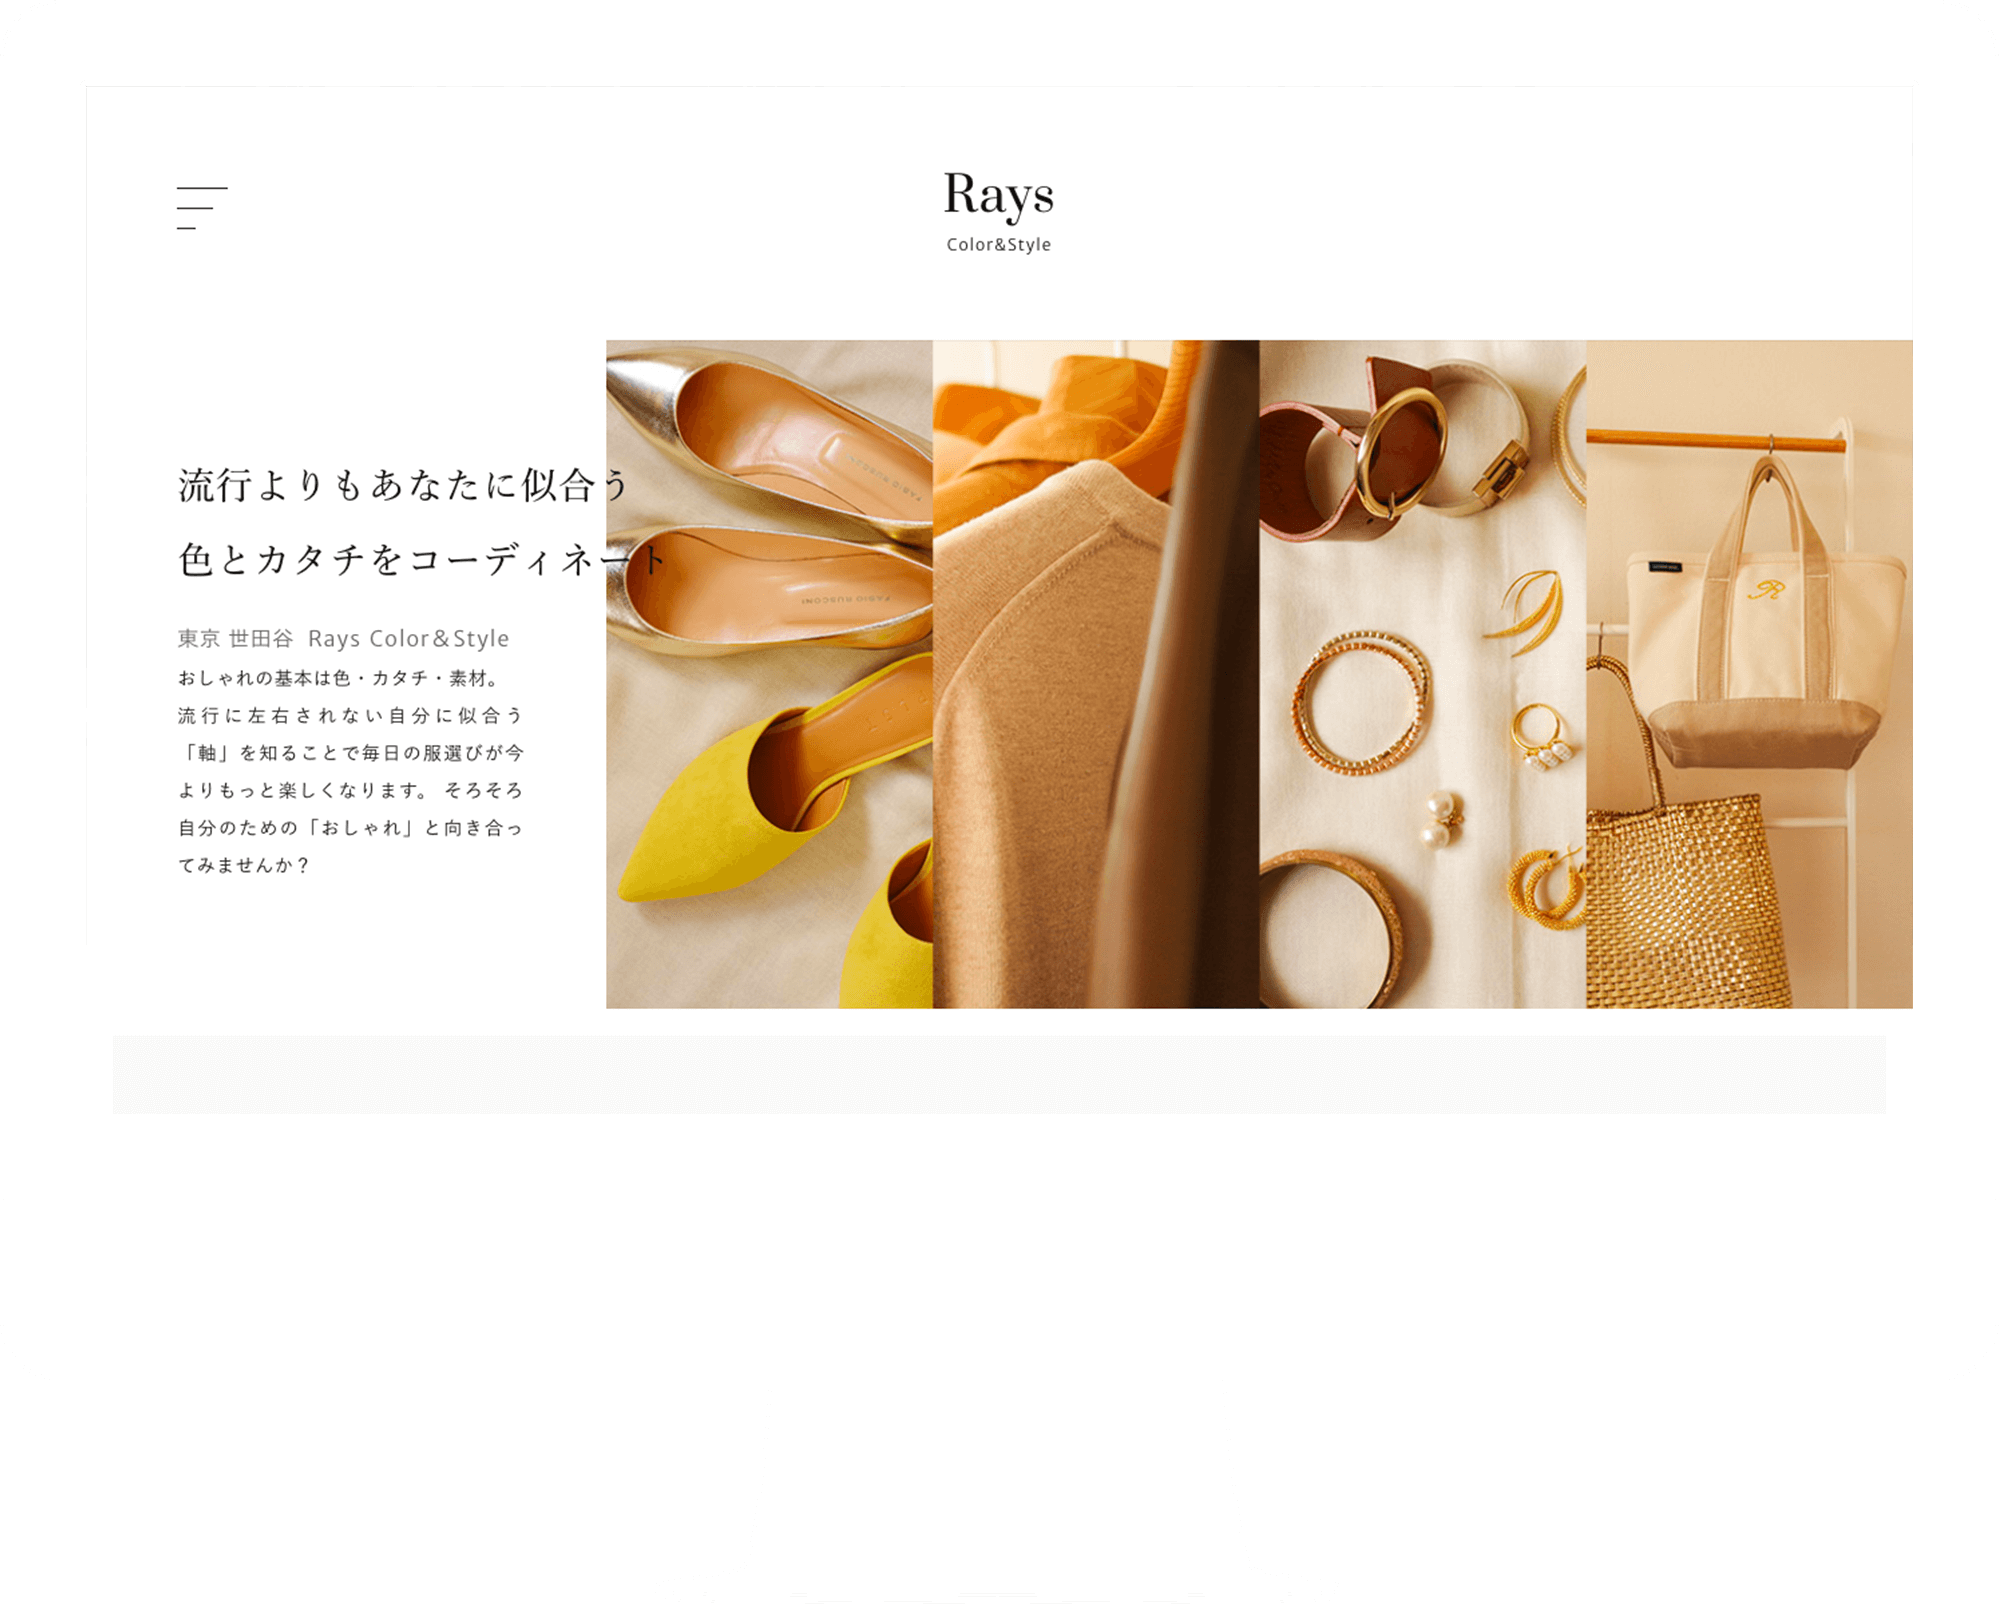 Rays color & style-PC表示